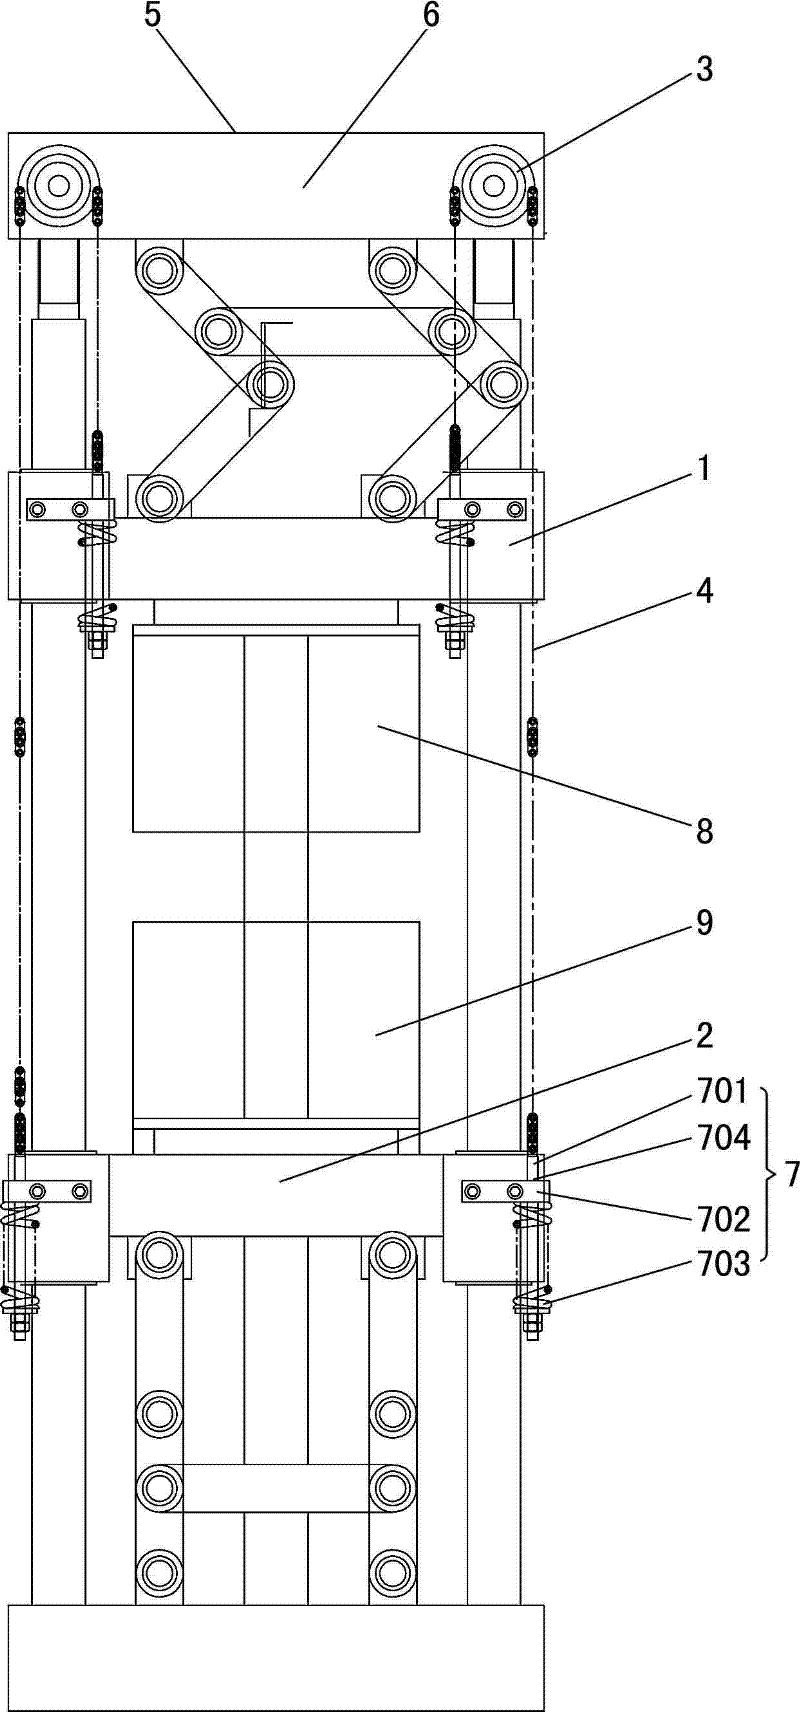 Device for automatically balancing moving die table